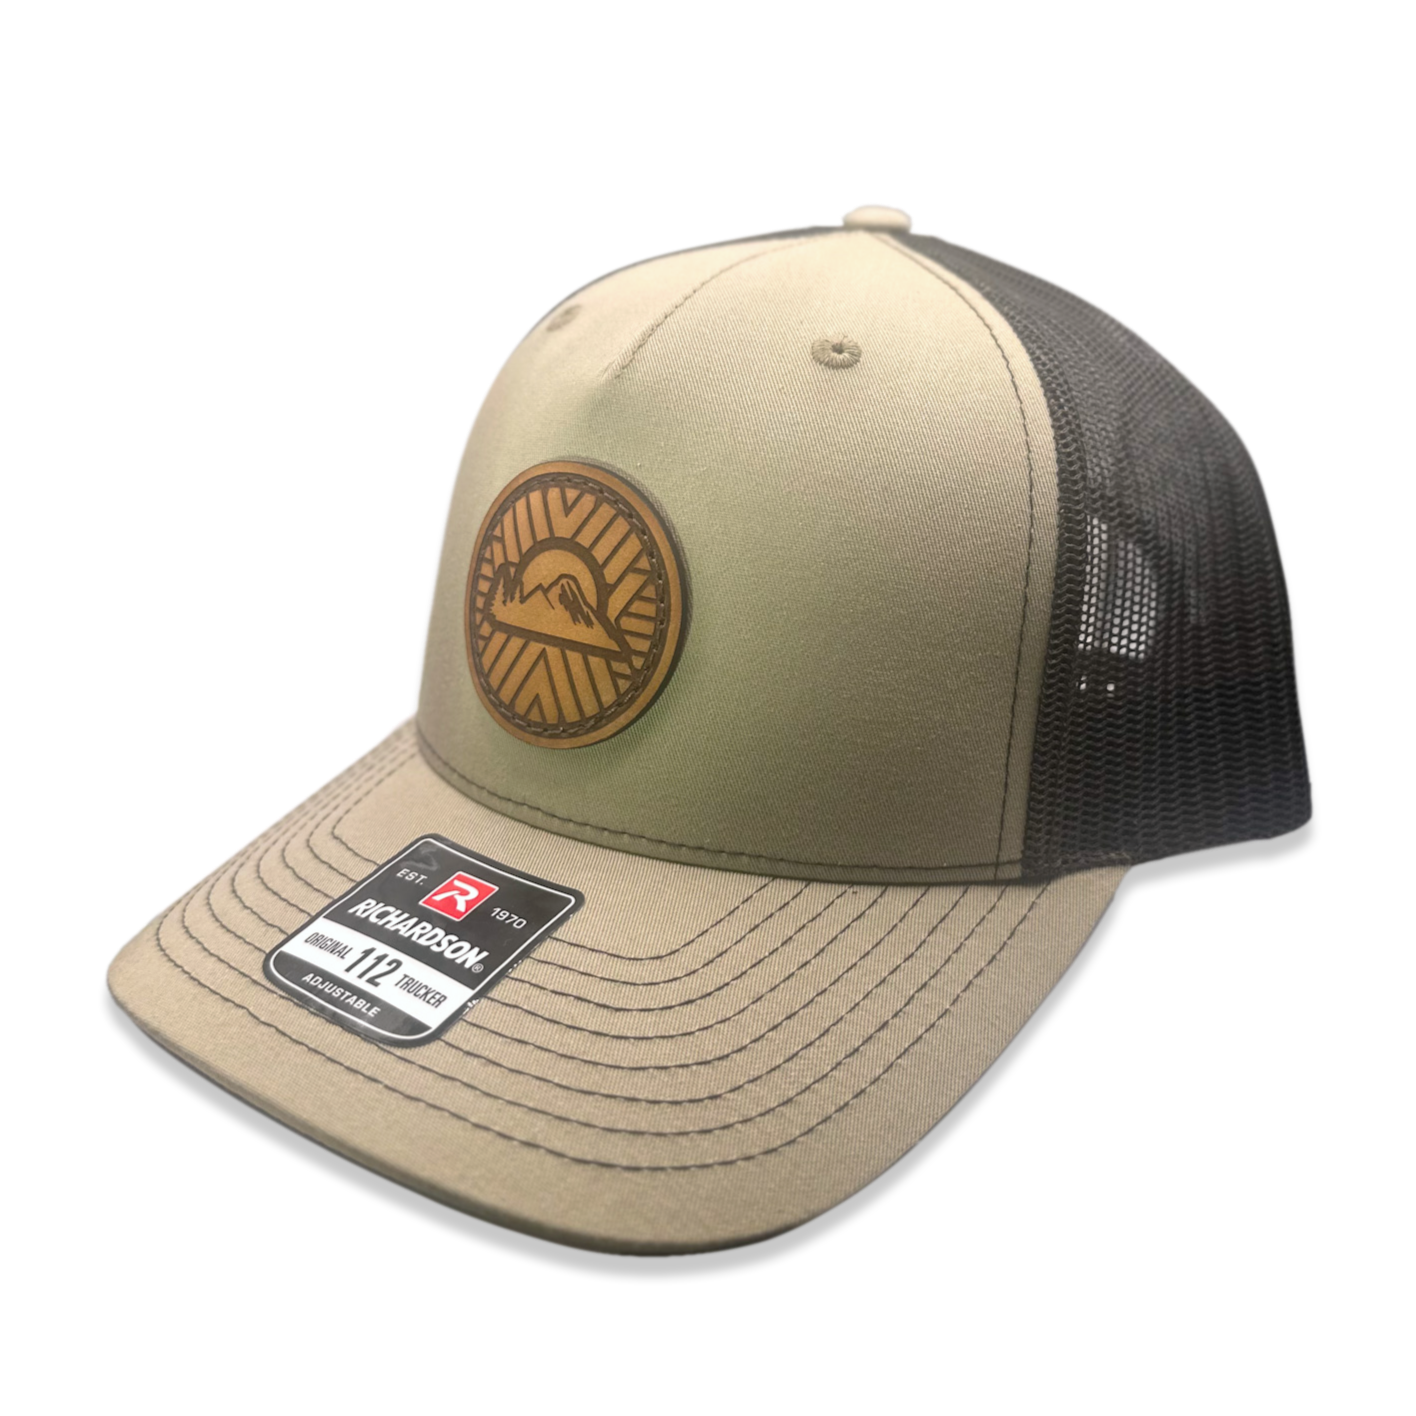 Custom Khaki/Coffee nRichardson Leather Patch hat. Our custom designed leather patch is laser engraved and sewn onto a Richardson 112 Hat. We use full-grain, veg tanned leather. Our custom leather patches are handmade and designed in Colorado, USA.